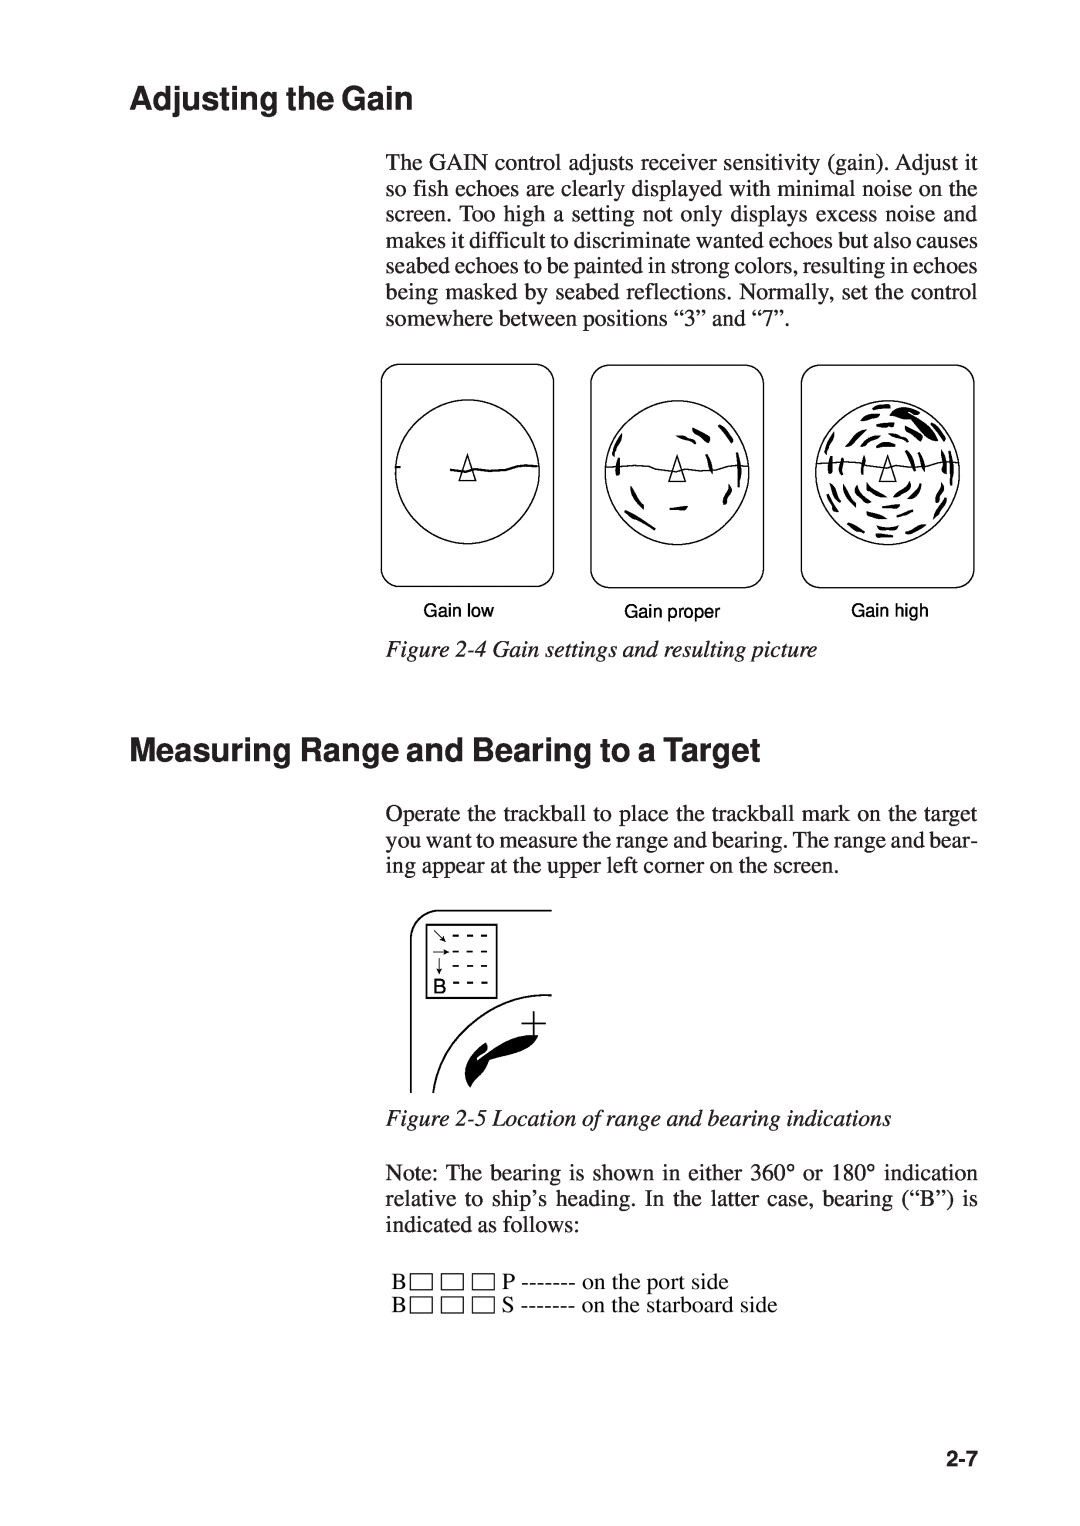 Furuno CSH-53 manual Adjusting the Gain, Measuring Range and Bearing to a Target, 4 Gain settings and resulting picture 